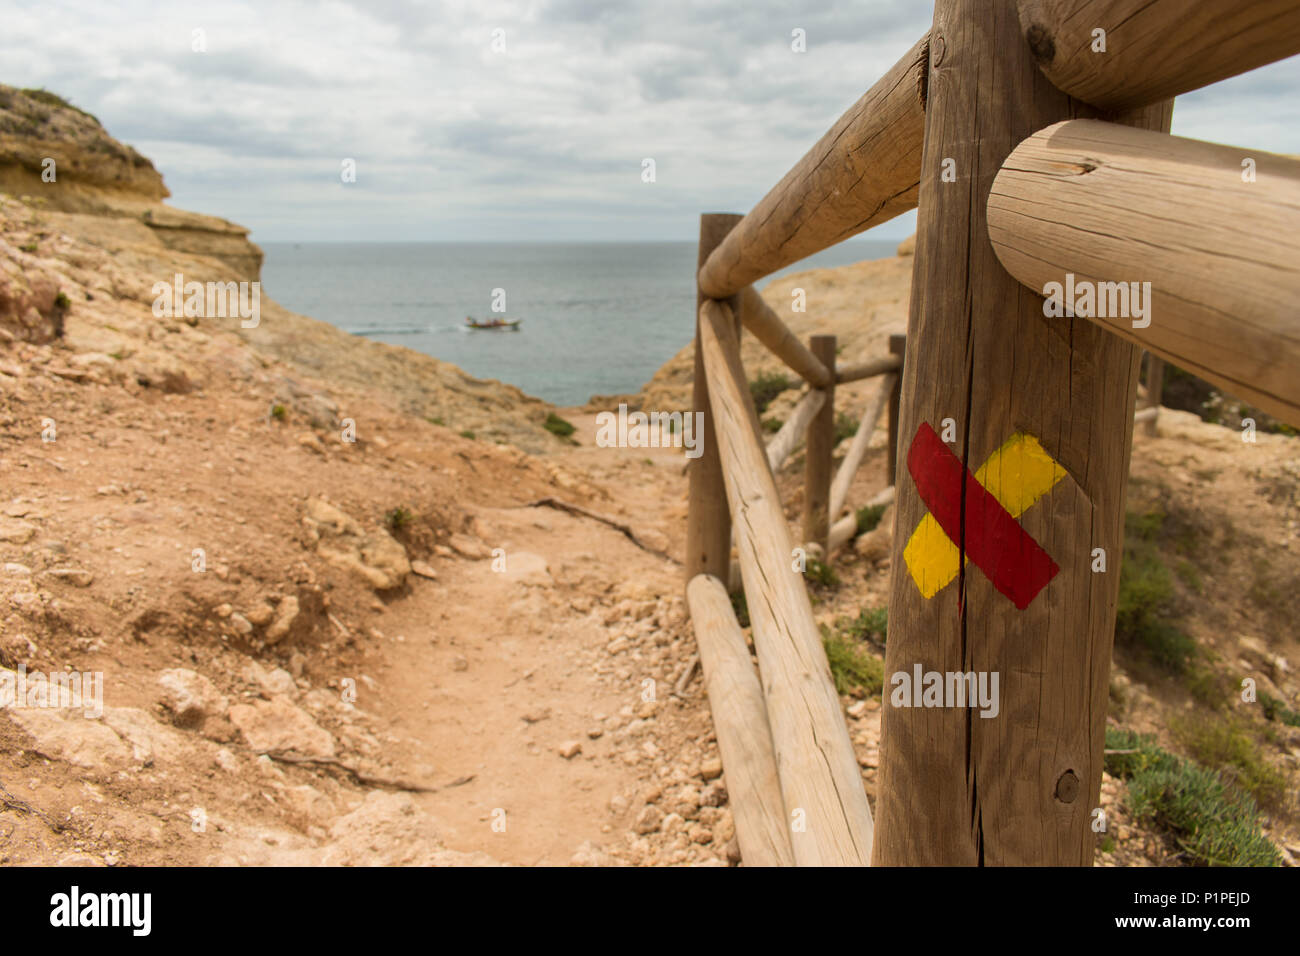 Fingerpost in the Algarve, Portugal. These fingerposts are used to mark walking routes and have recognisable red and yellow markings. Stock Photo